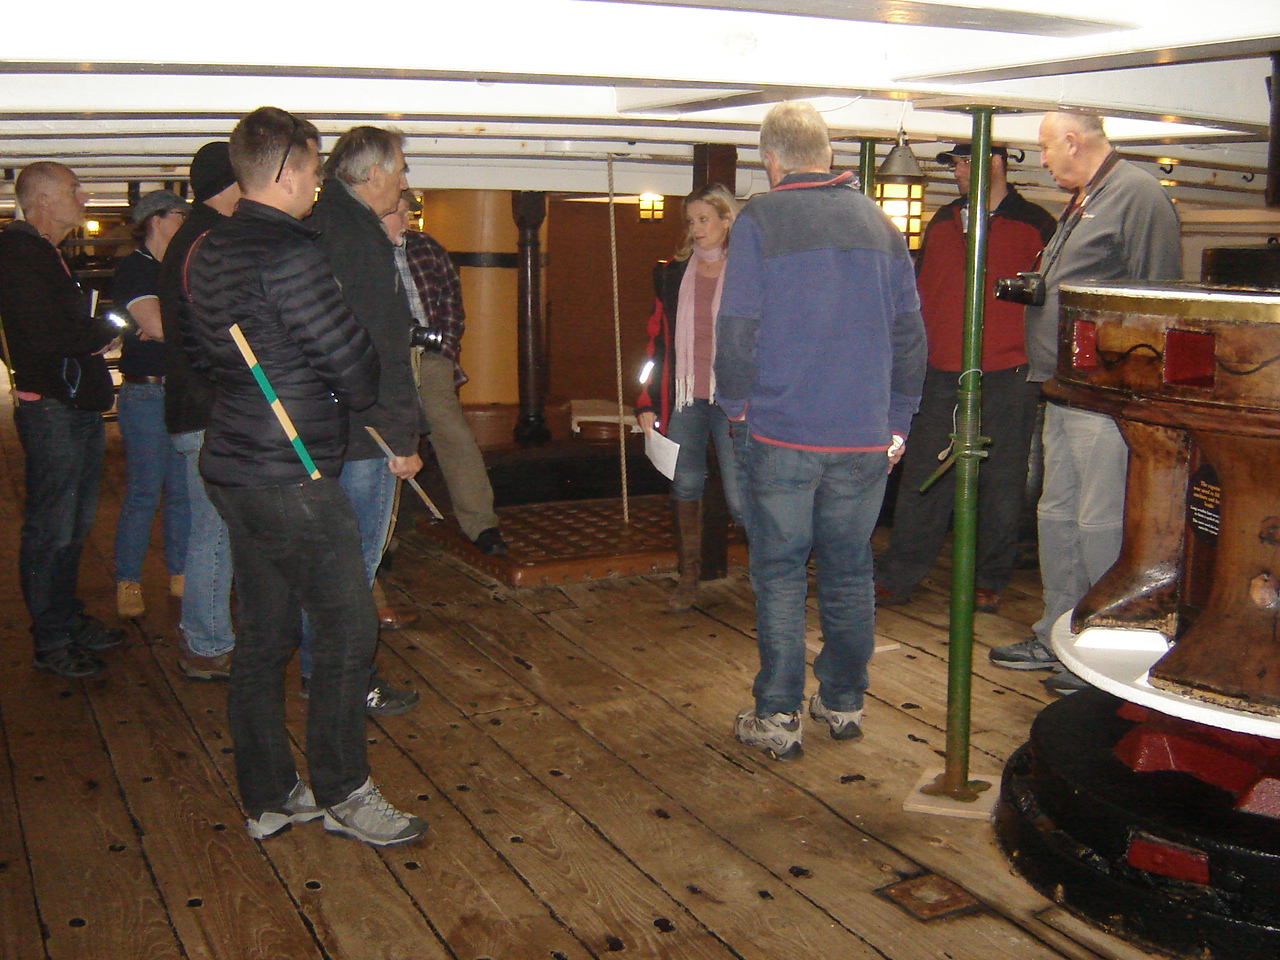 A guided tour below decks by the the museum's curator